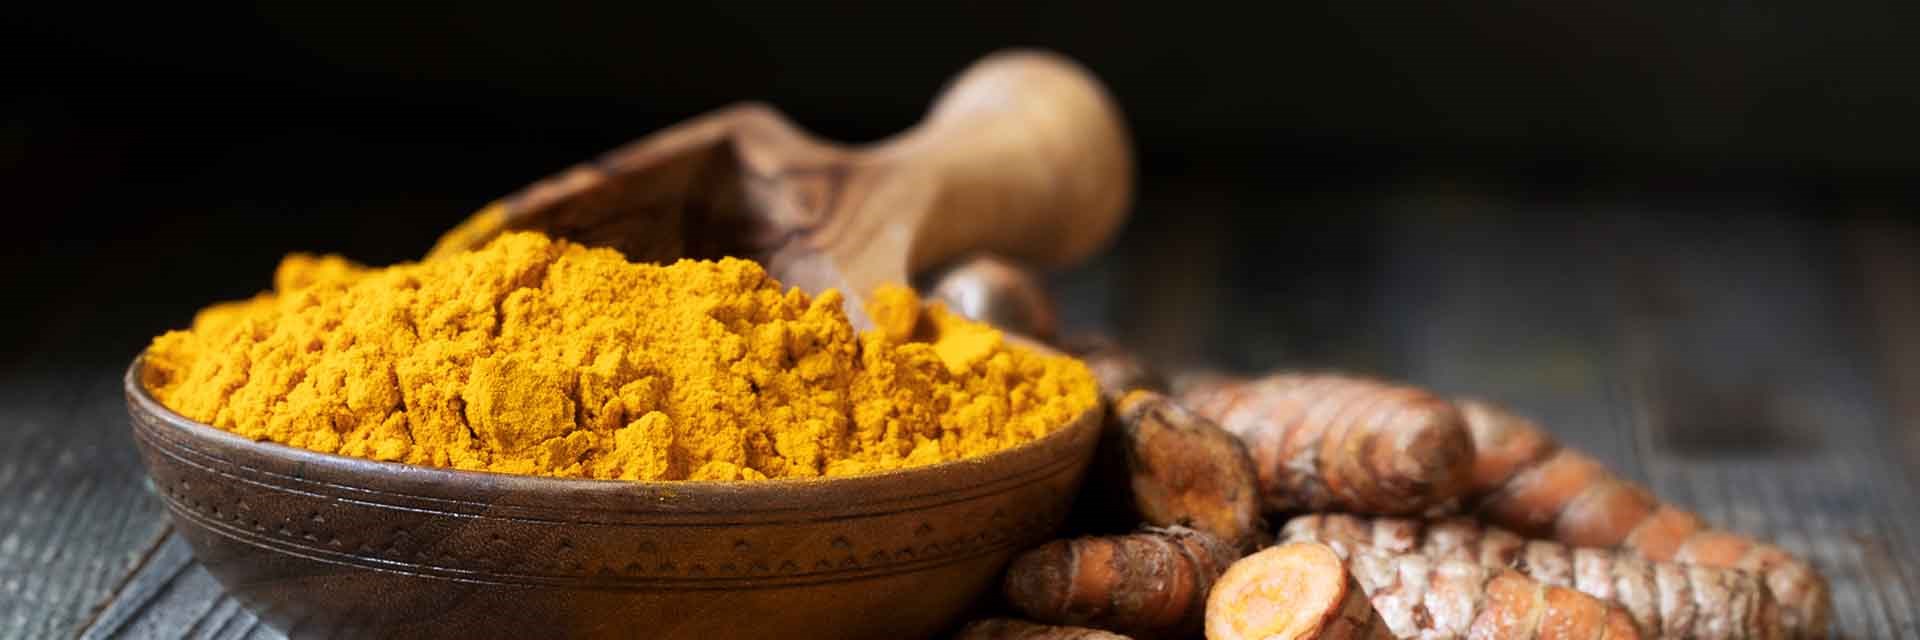 A wooden bowl of the bright orange turmeric powder, with fresh turmeric next to the bowl